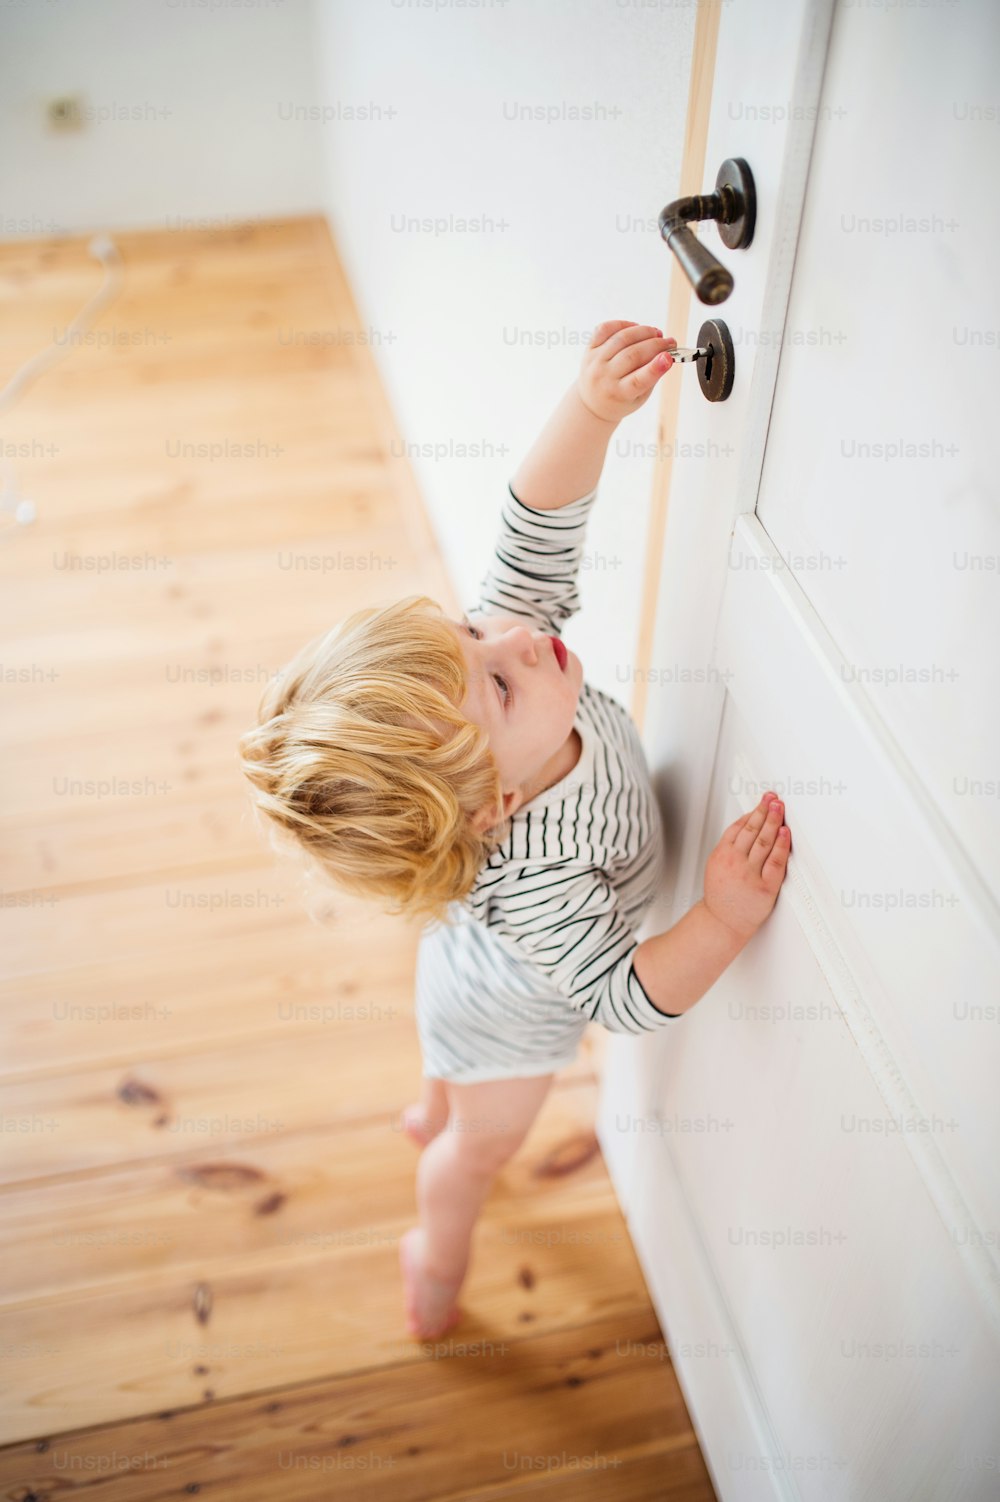 Cute toddler child locking door. Domestic accident. Dangerous situation at home.